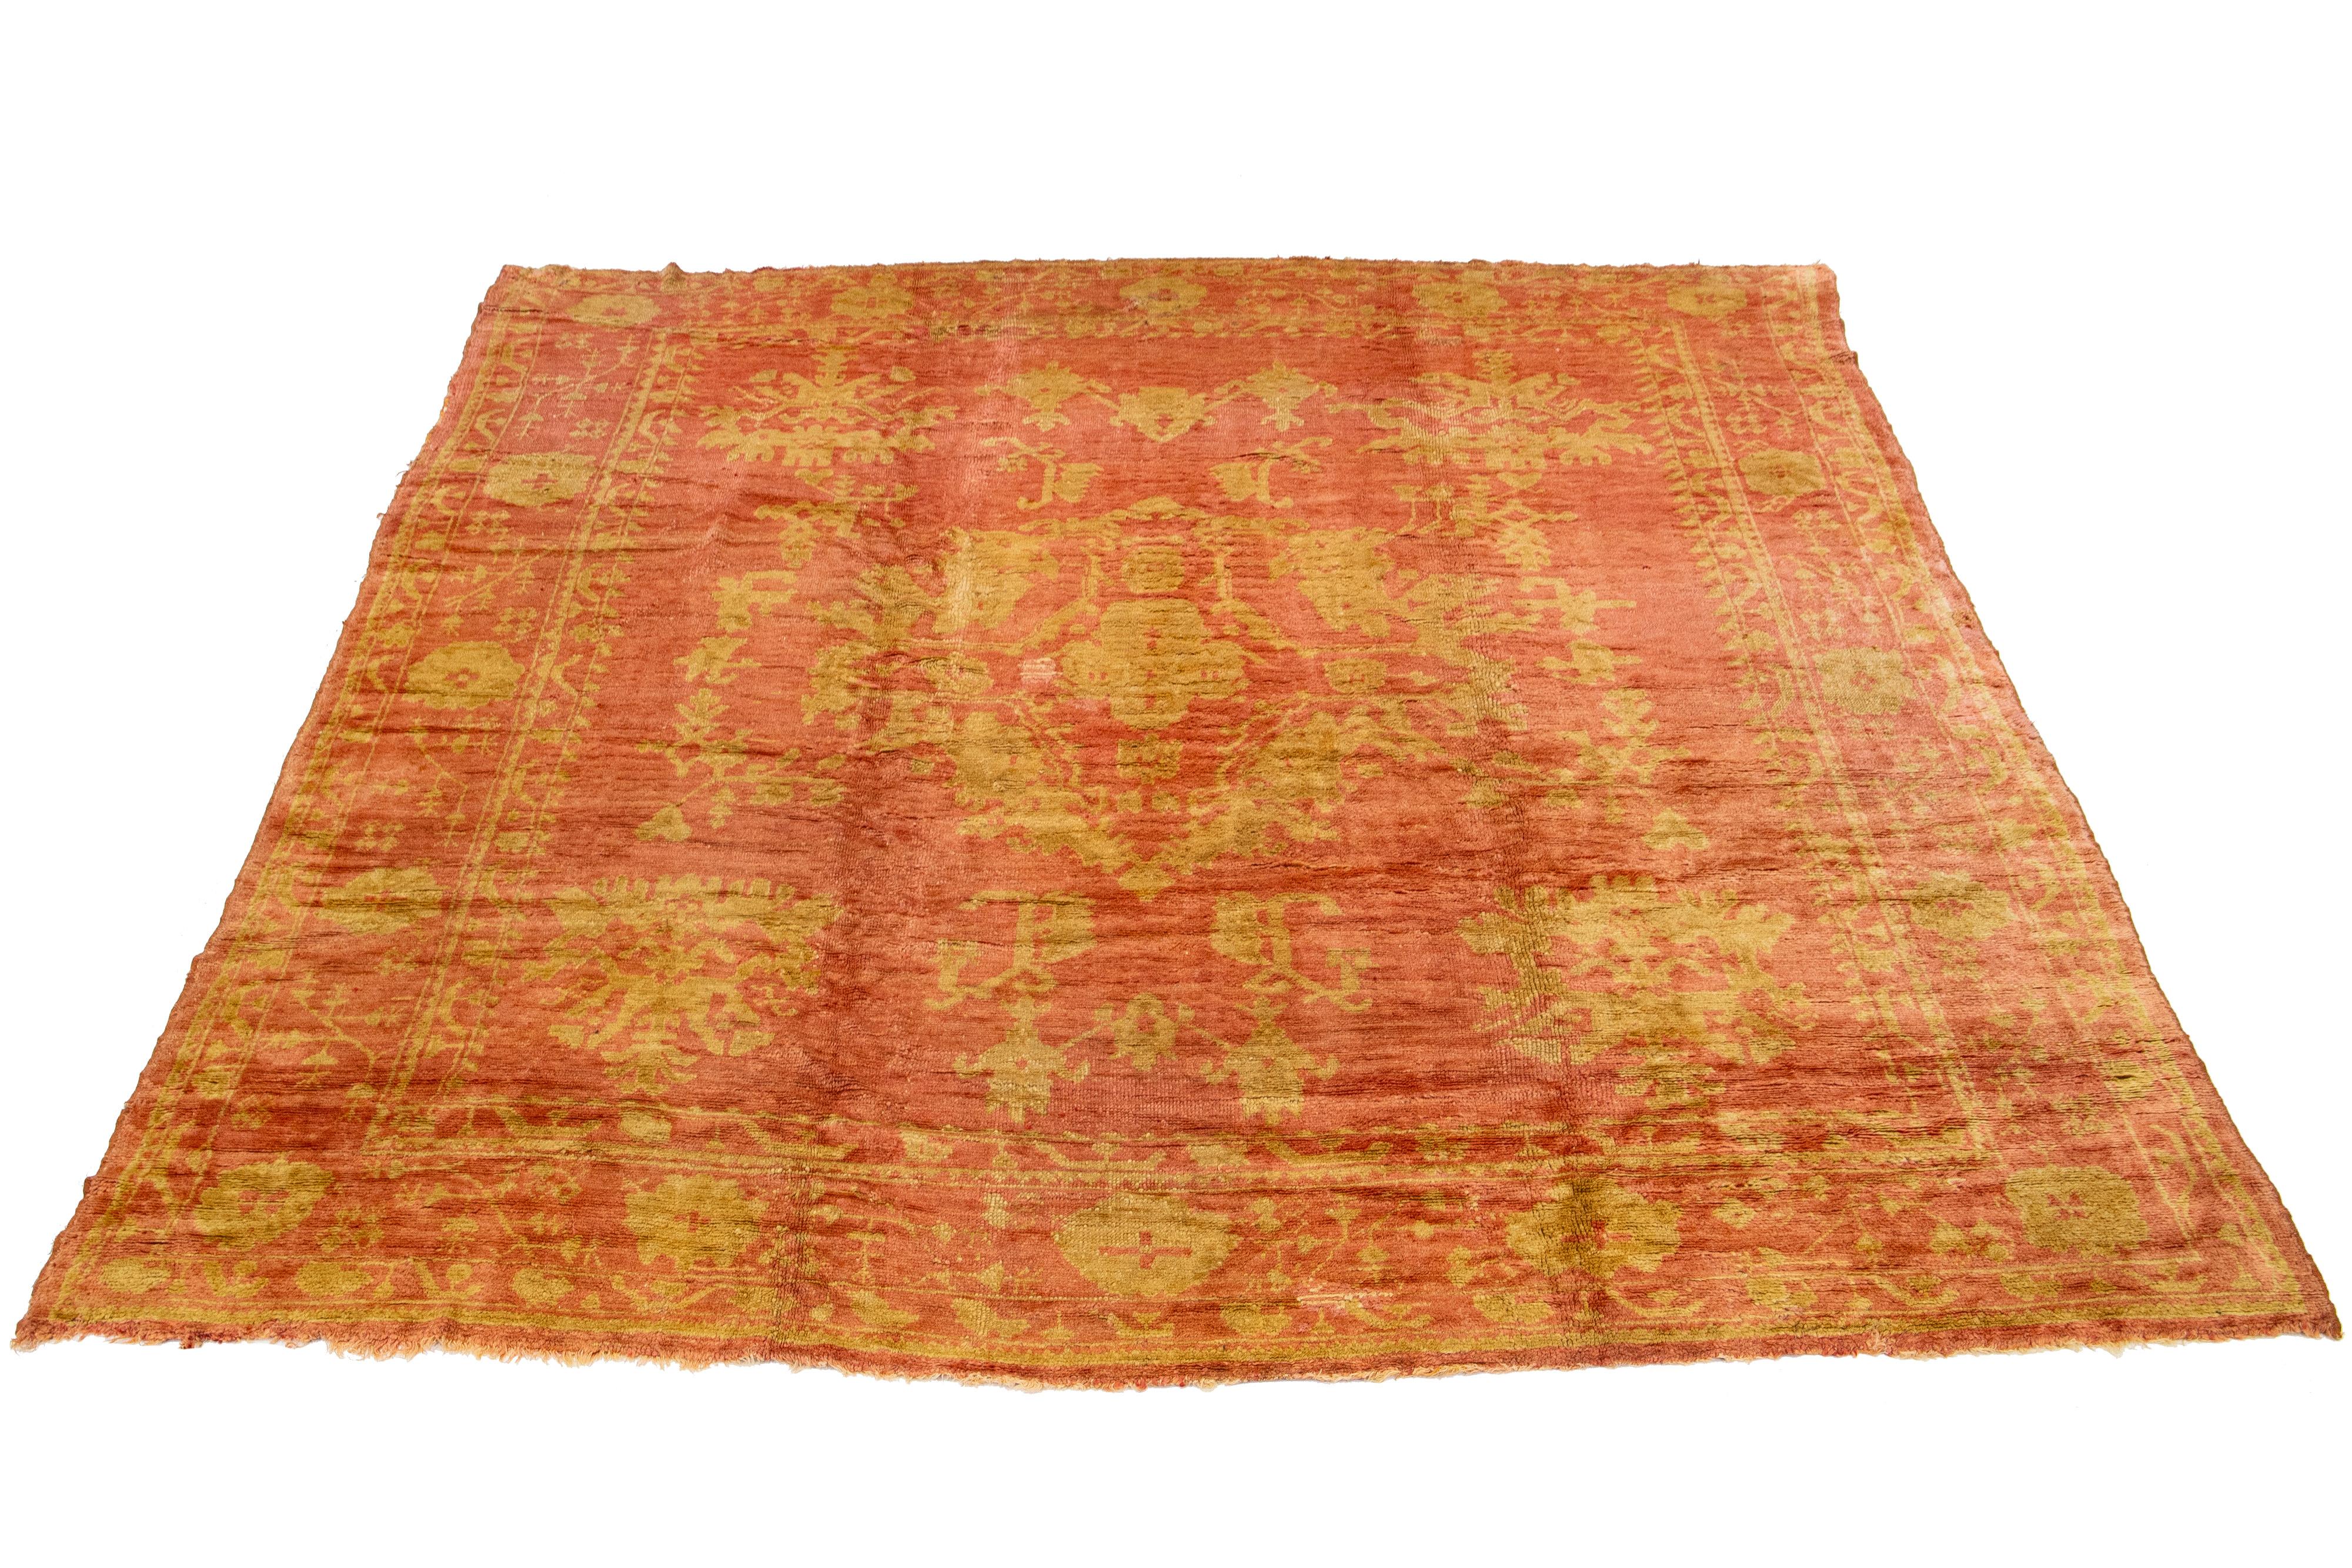 This antique Turkish wool rug from the 20th century features a charming terracotta-colored base and is meticulously hand-knotted with great attention to detail. It showcases stunning tan-golden accents that display a captivating floral